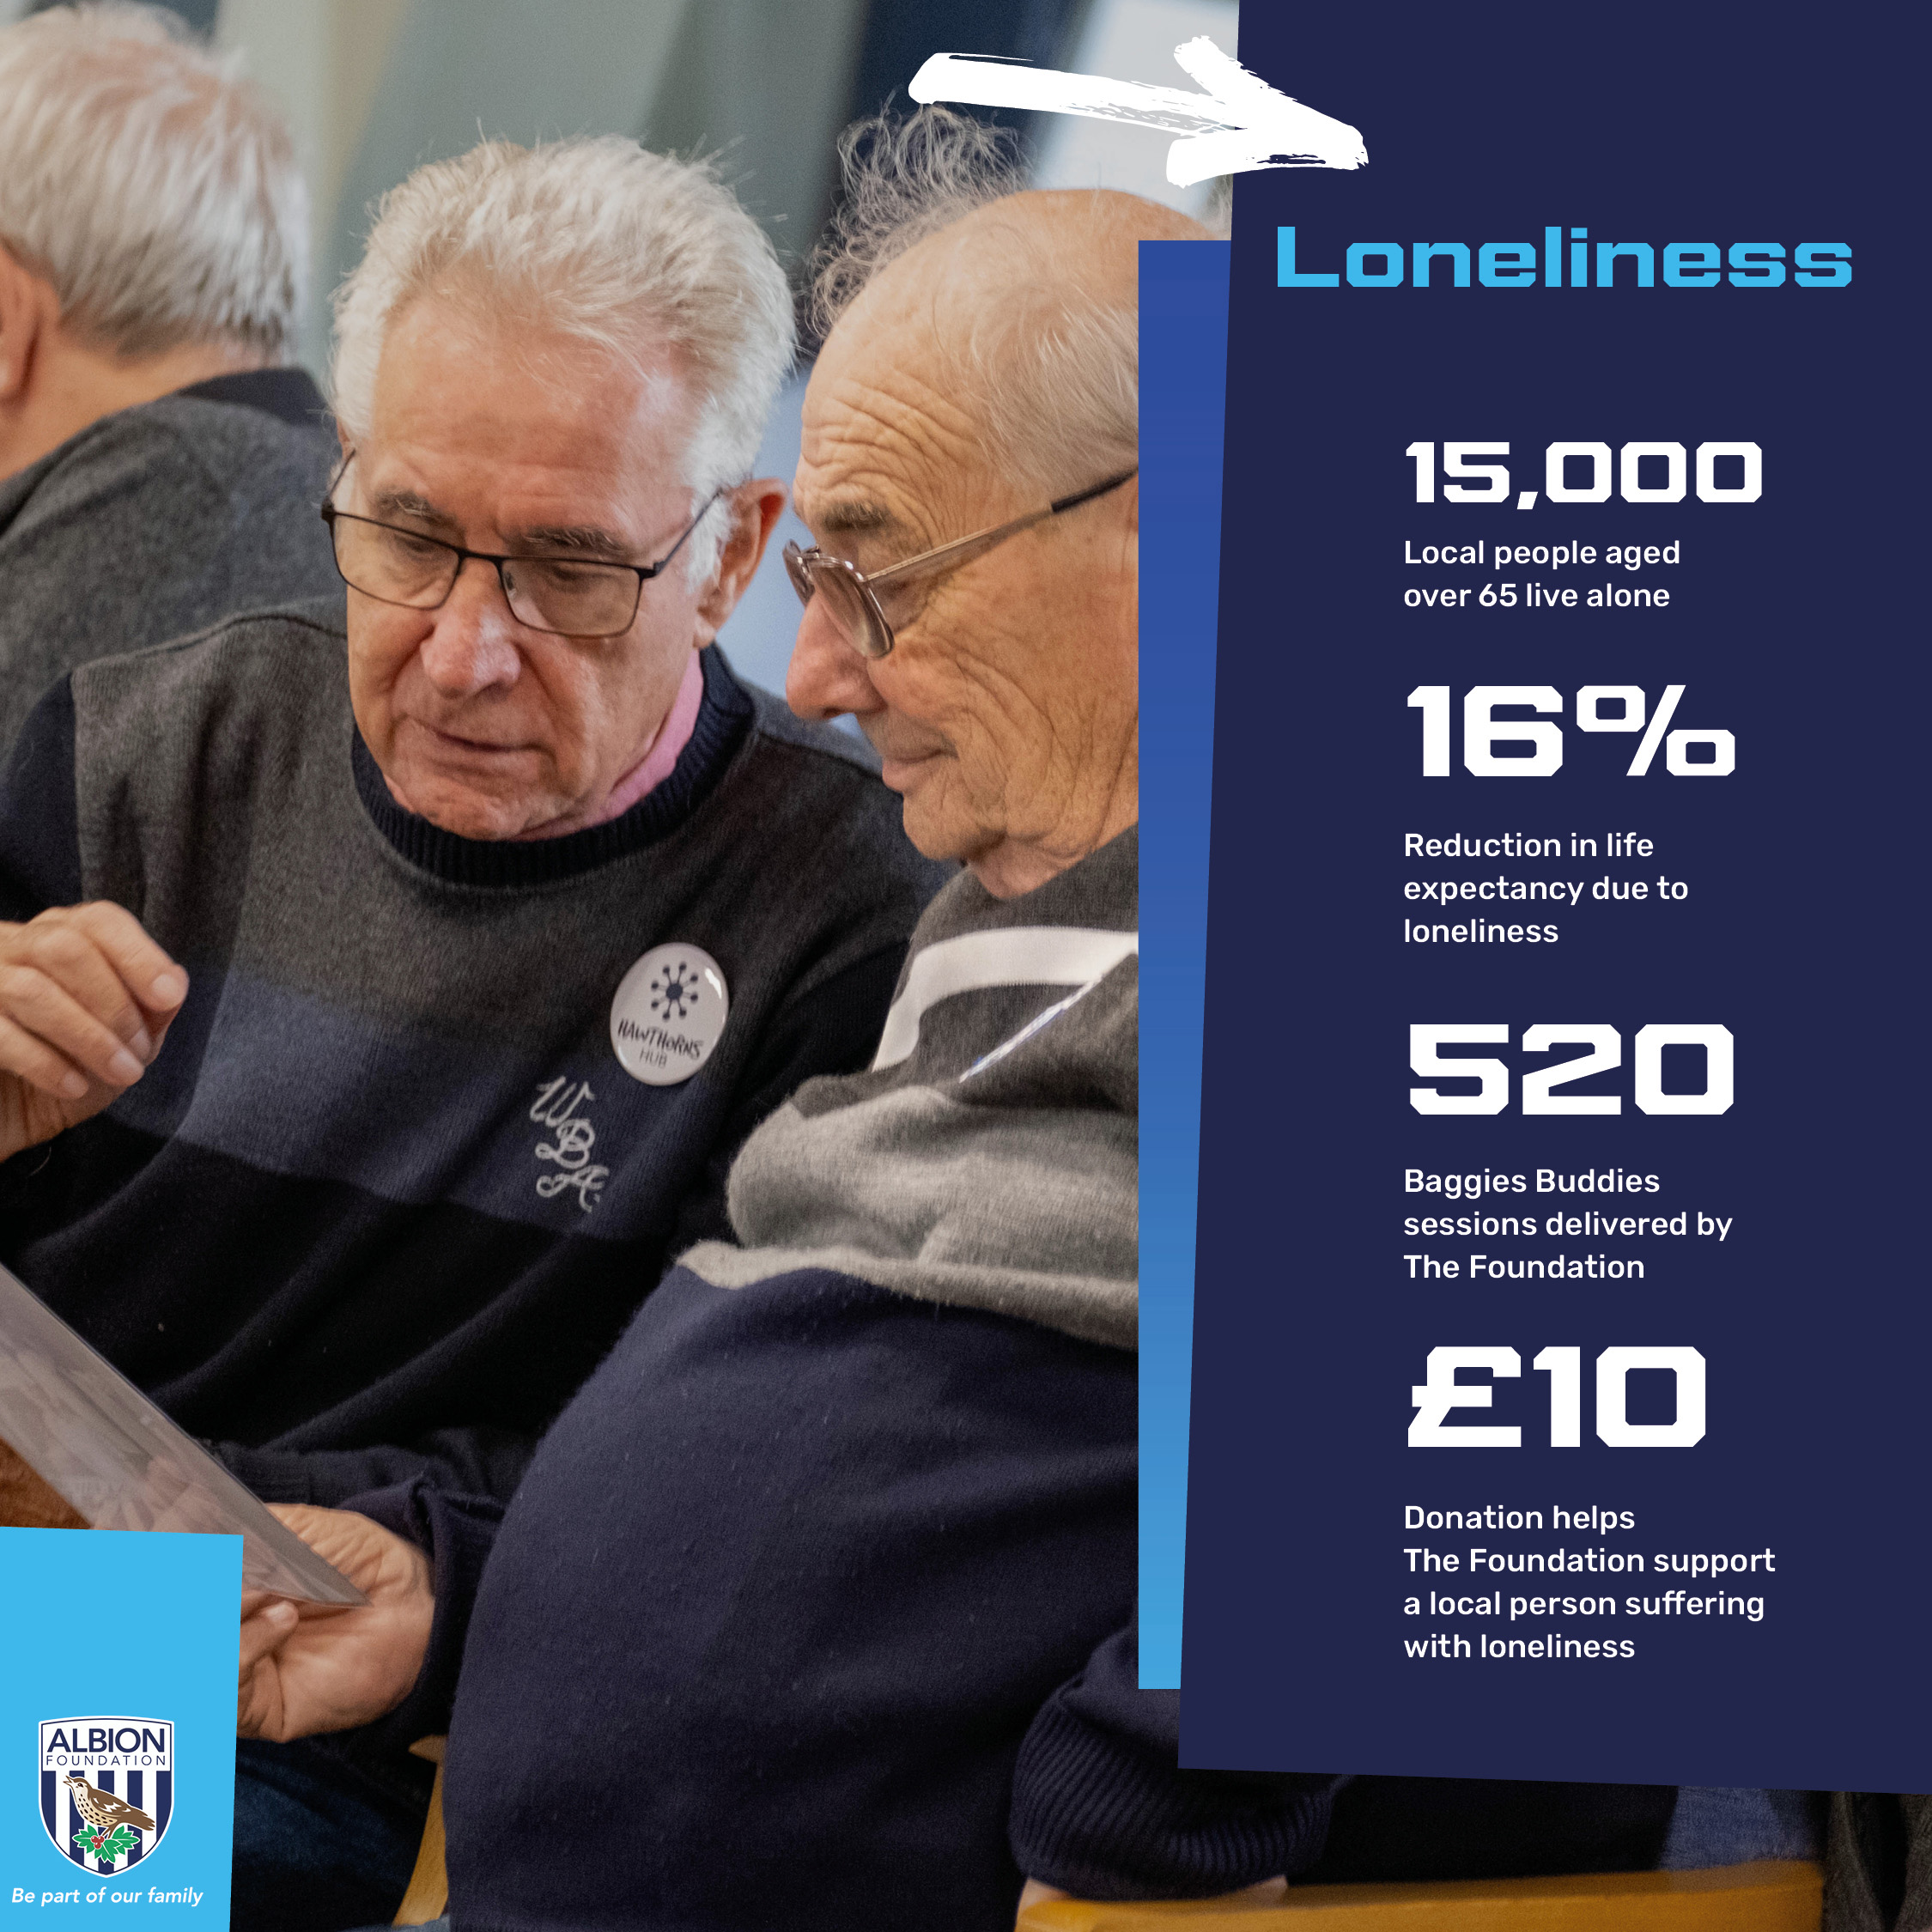 Tackling Loneliness in Sandwell